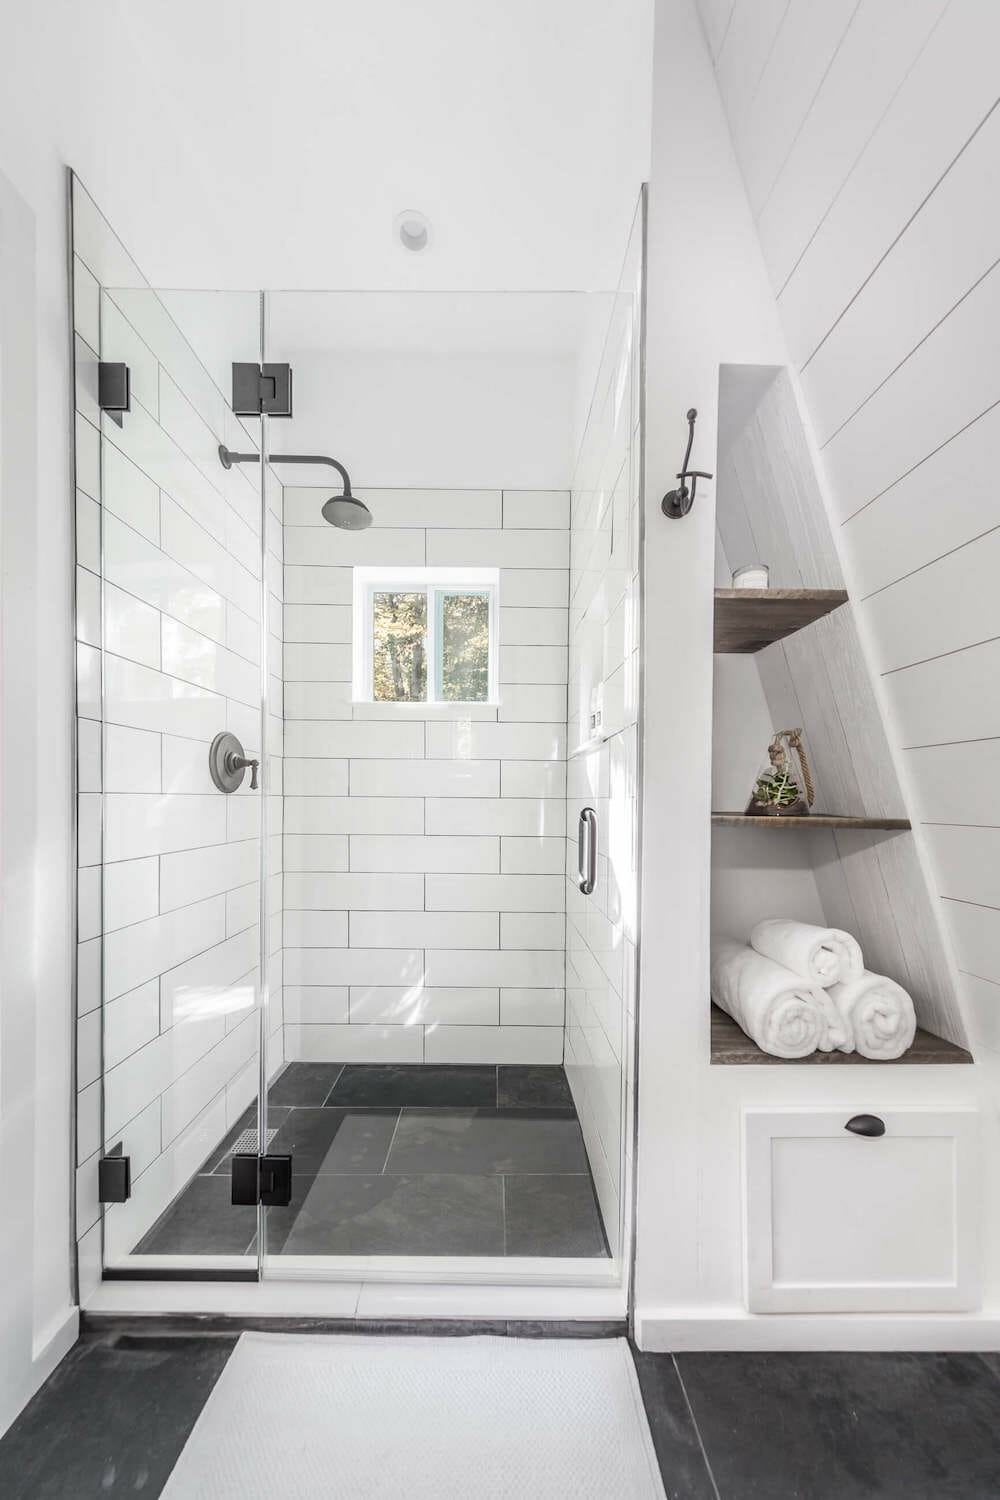 Half of a small bathroom converted from a closet with modern farmhouse decor and shelving built into a sloped wall.